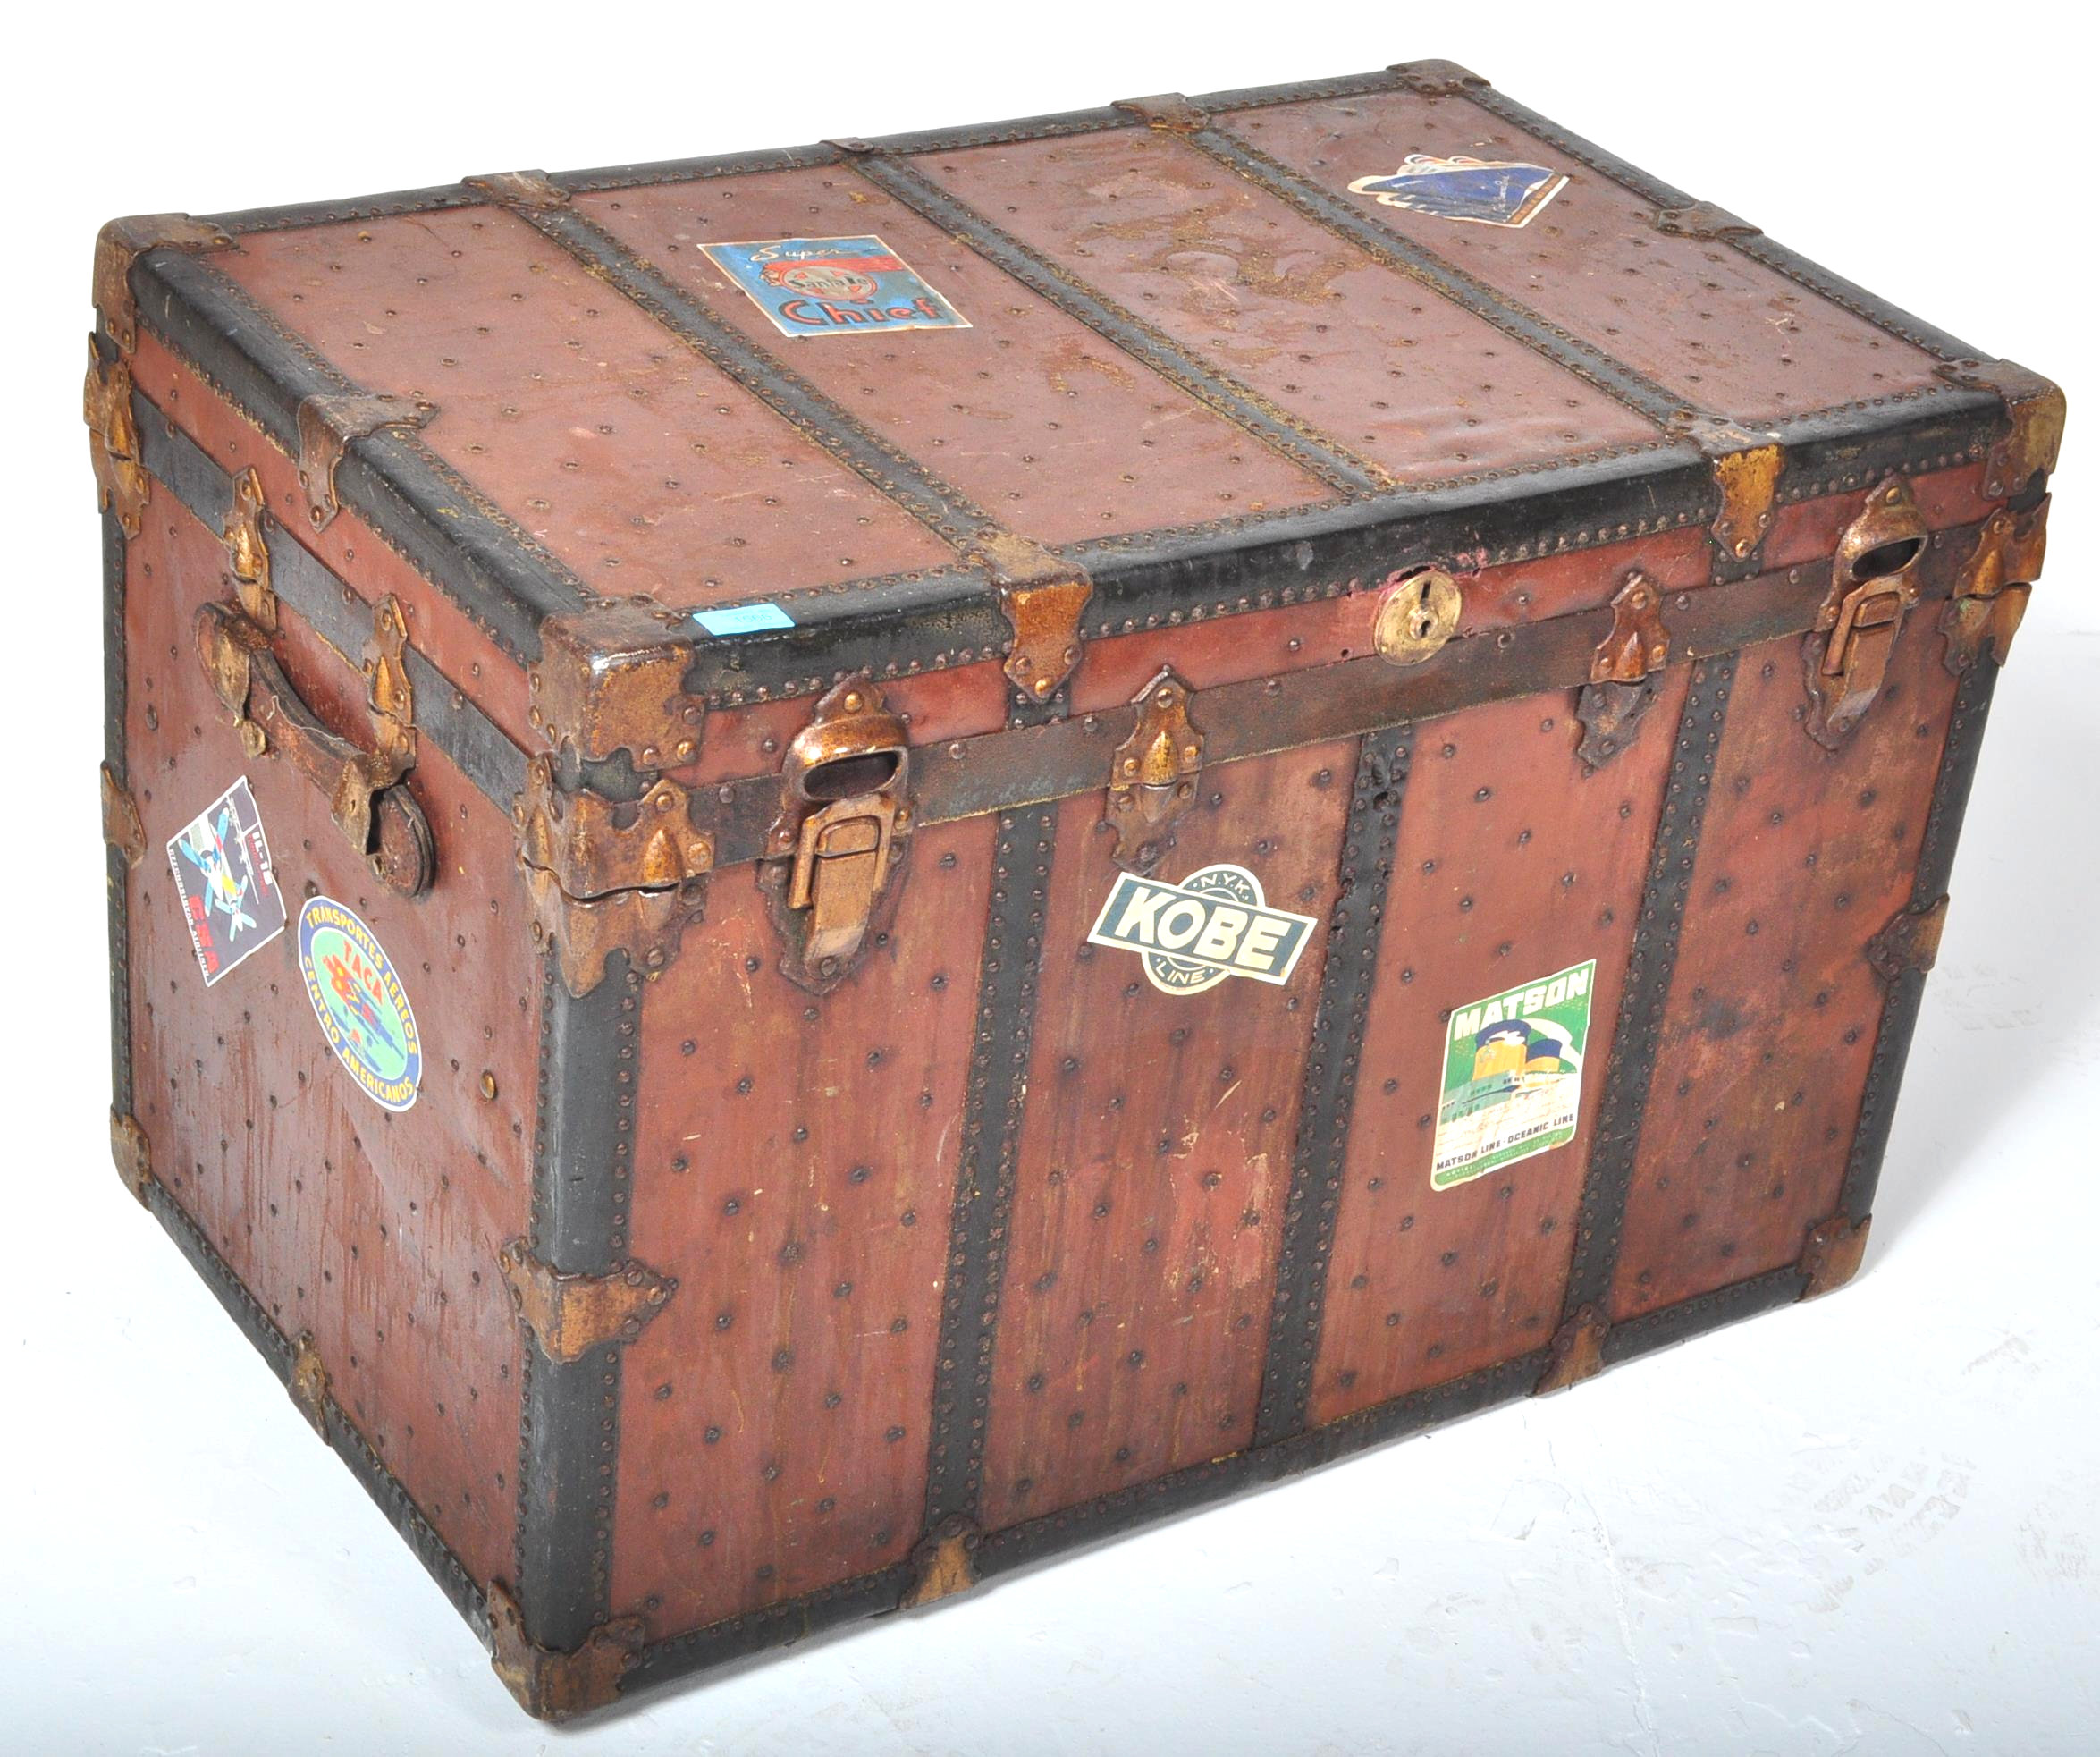 VINTAGE MID 20TH CENTURY TRAVEL TRUNK - Image 2 of 5